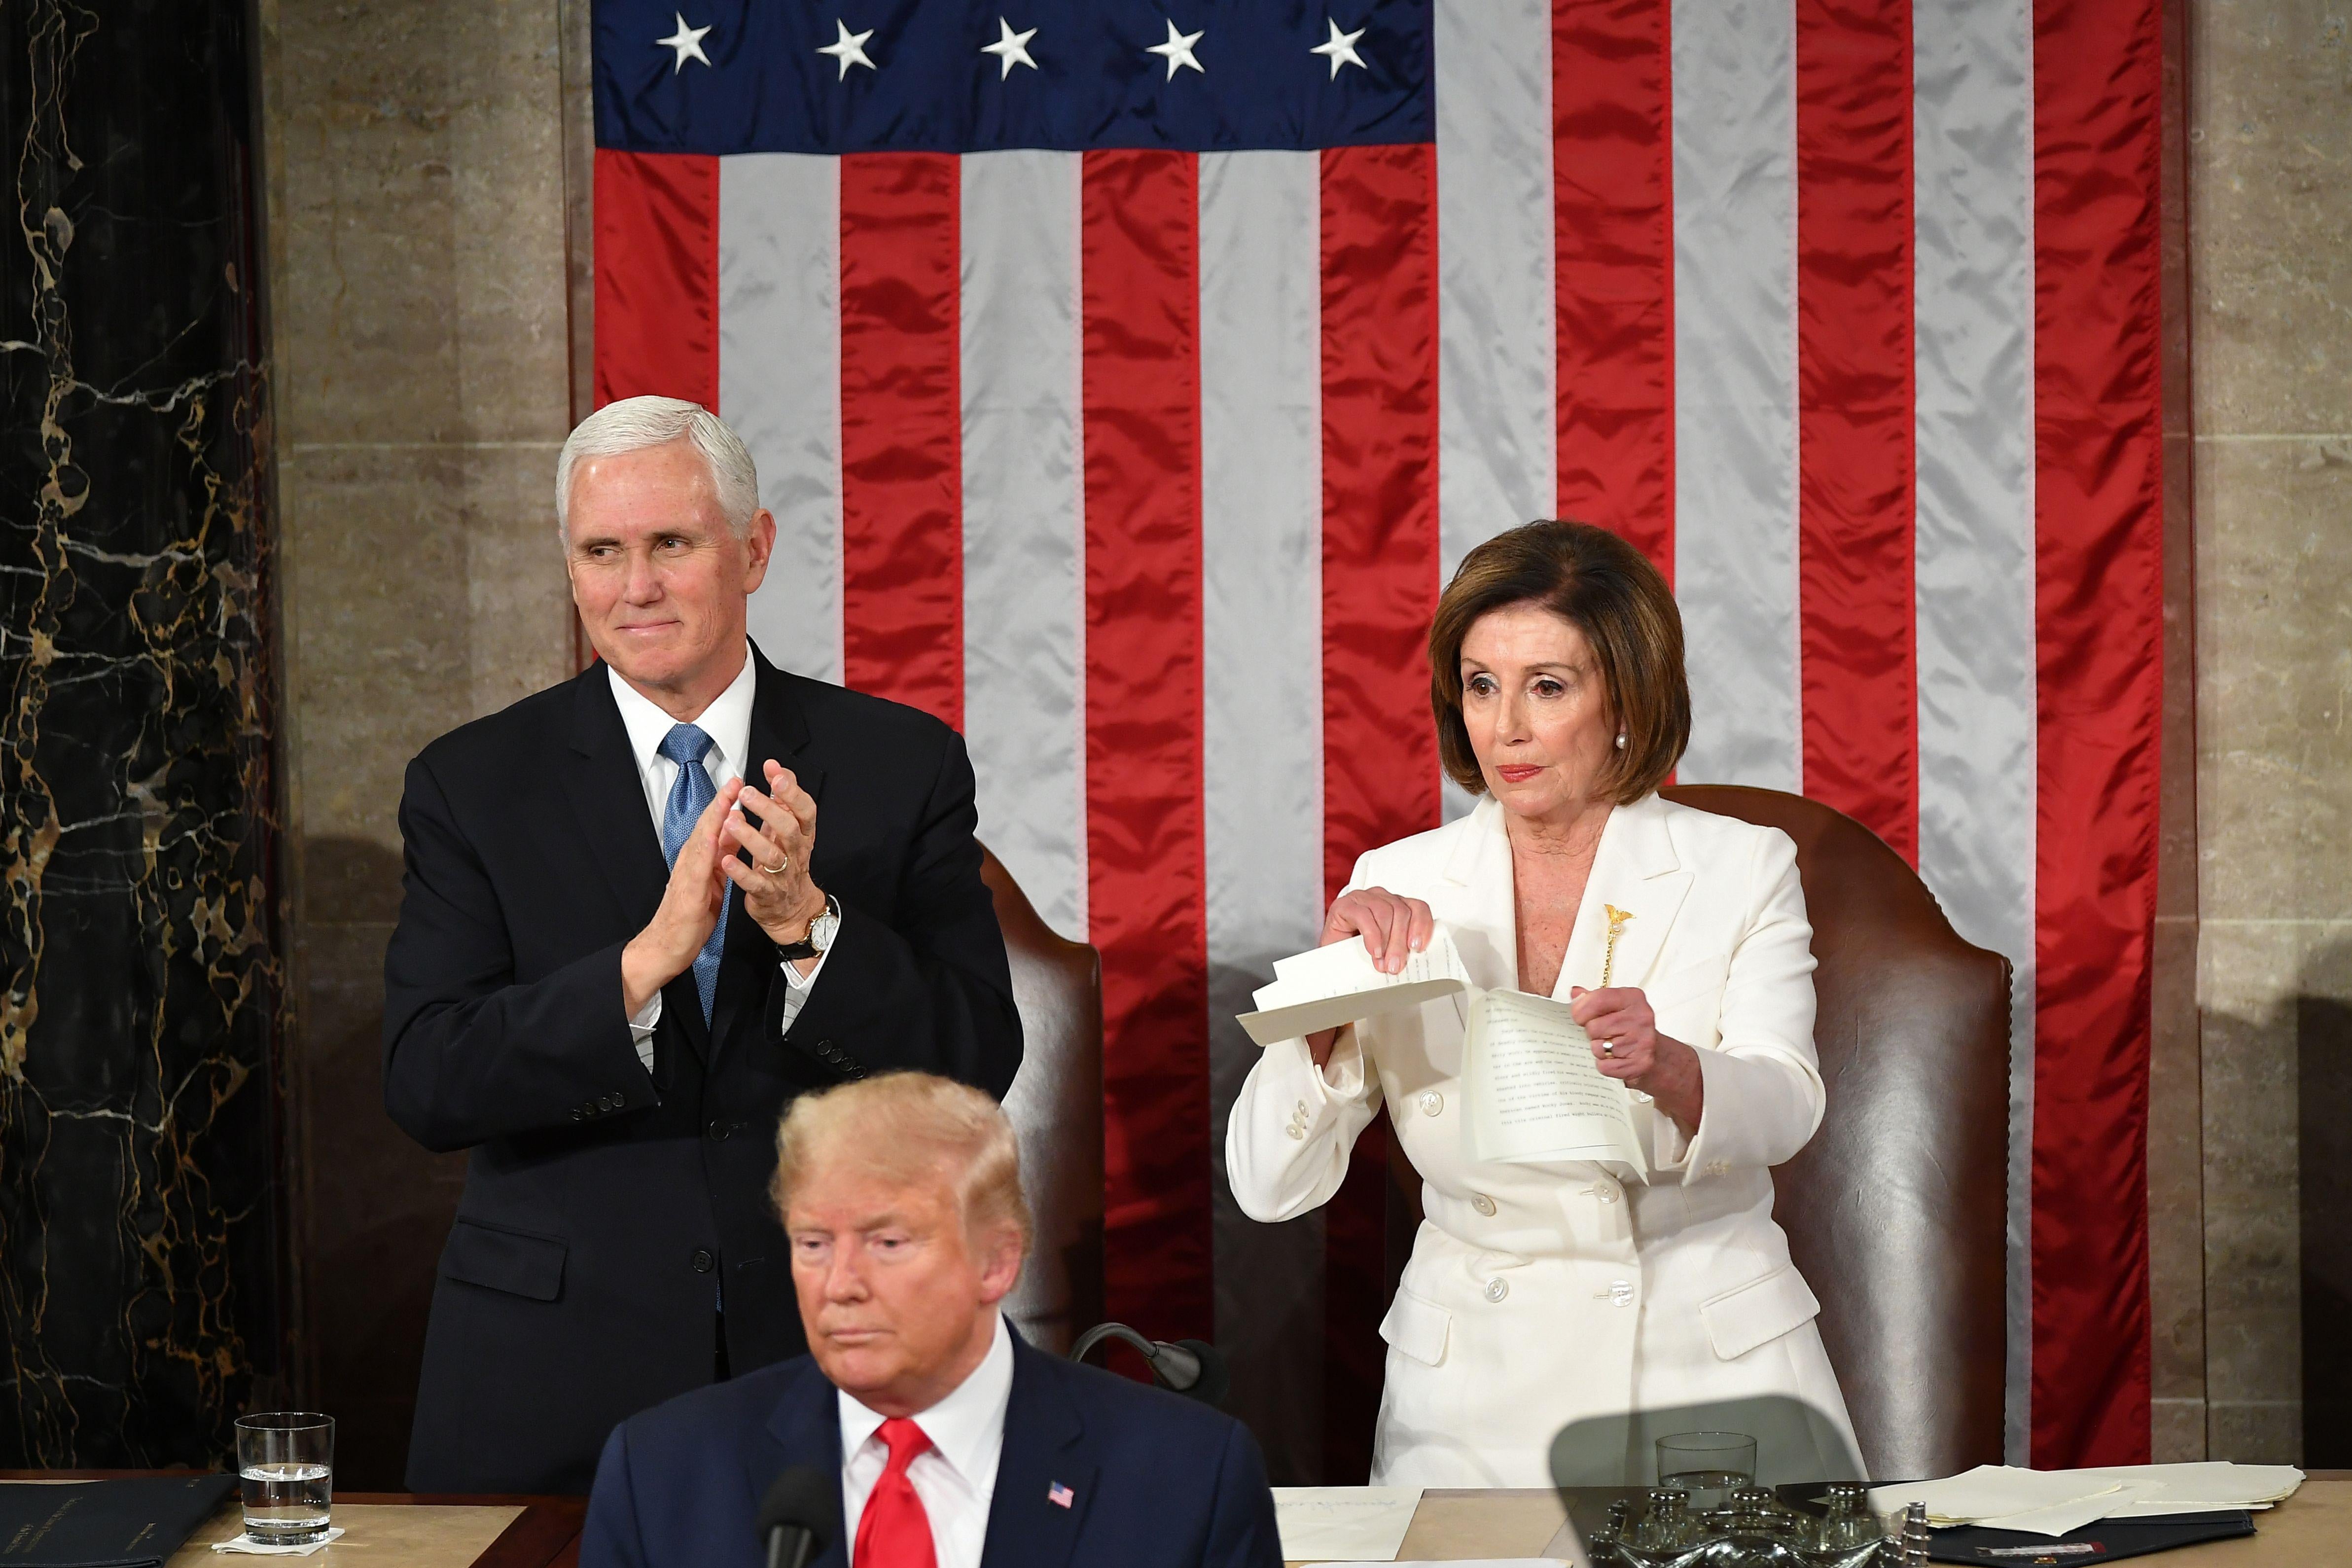 Vice President Mike Pence claps as House Speaker Nancy Pelosi rips a copy of President Donald Trump's State of the Union in Washington, DC.